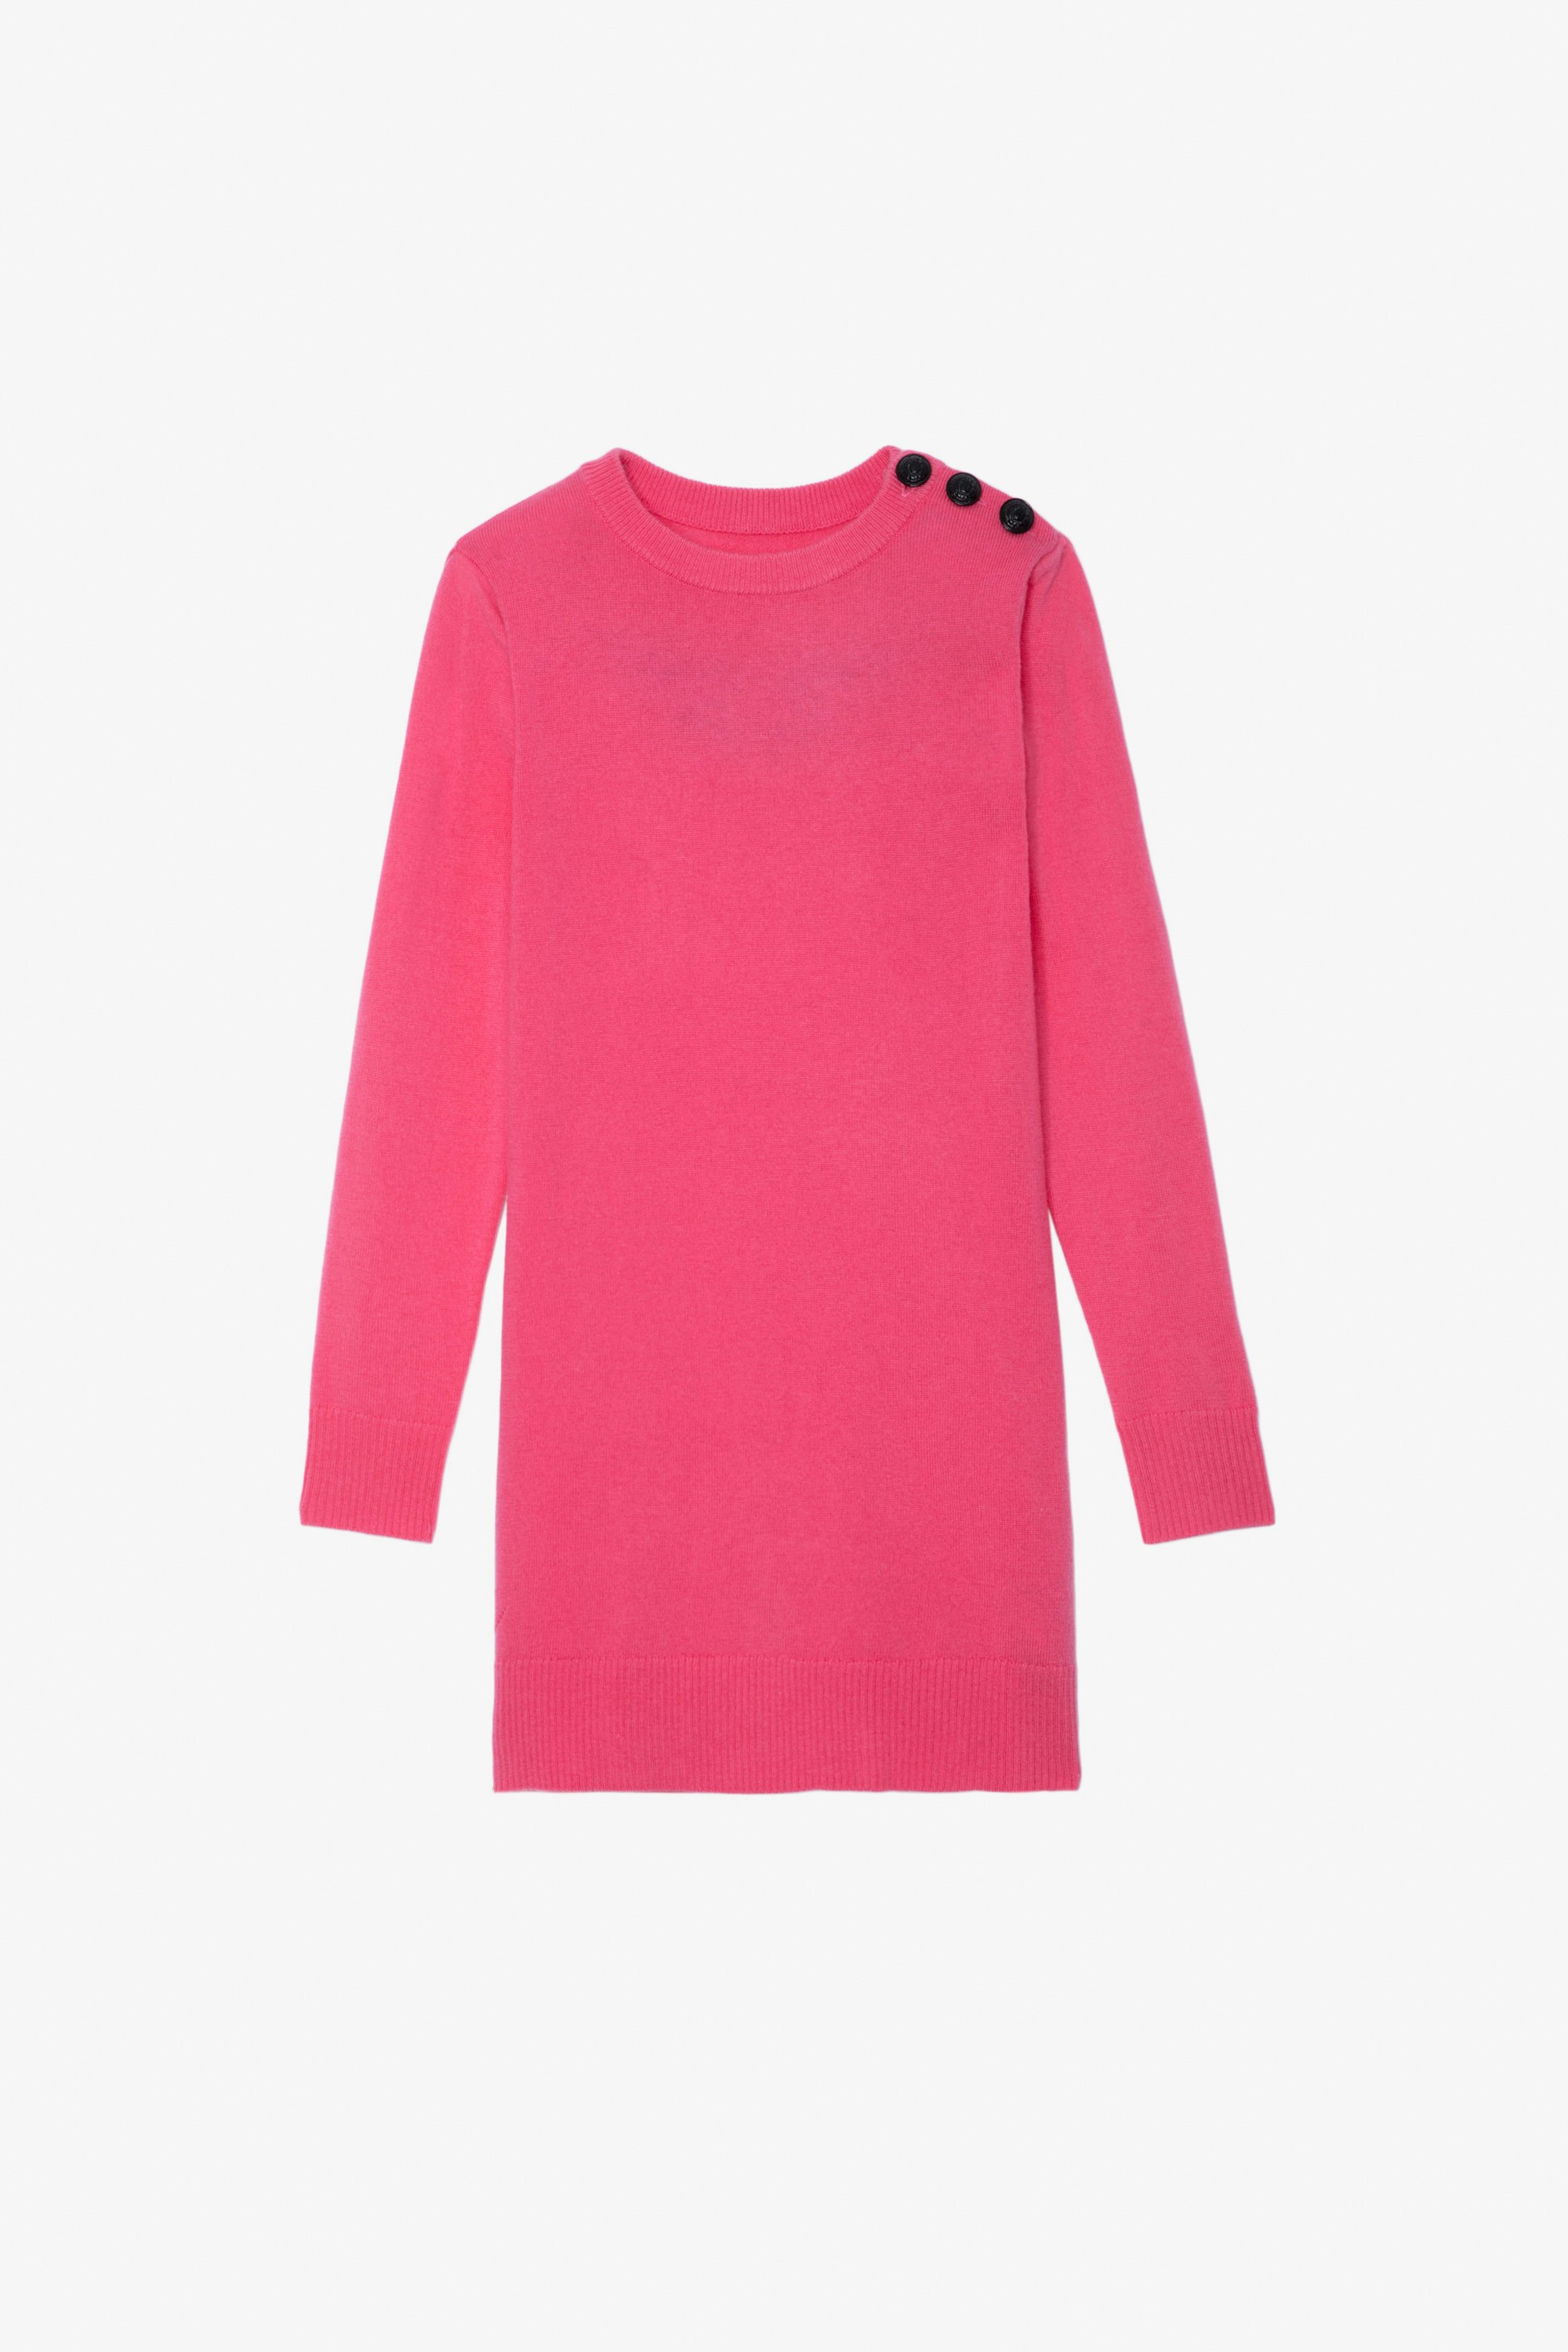 Harlow Girls’ Dress - Girls’ pink knit dress with buttons and embroidered wings on the back.